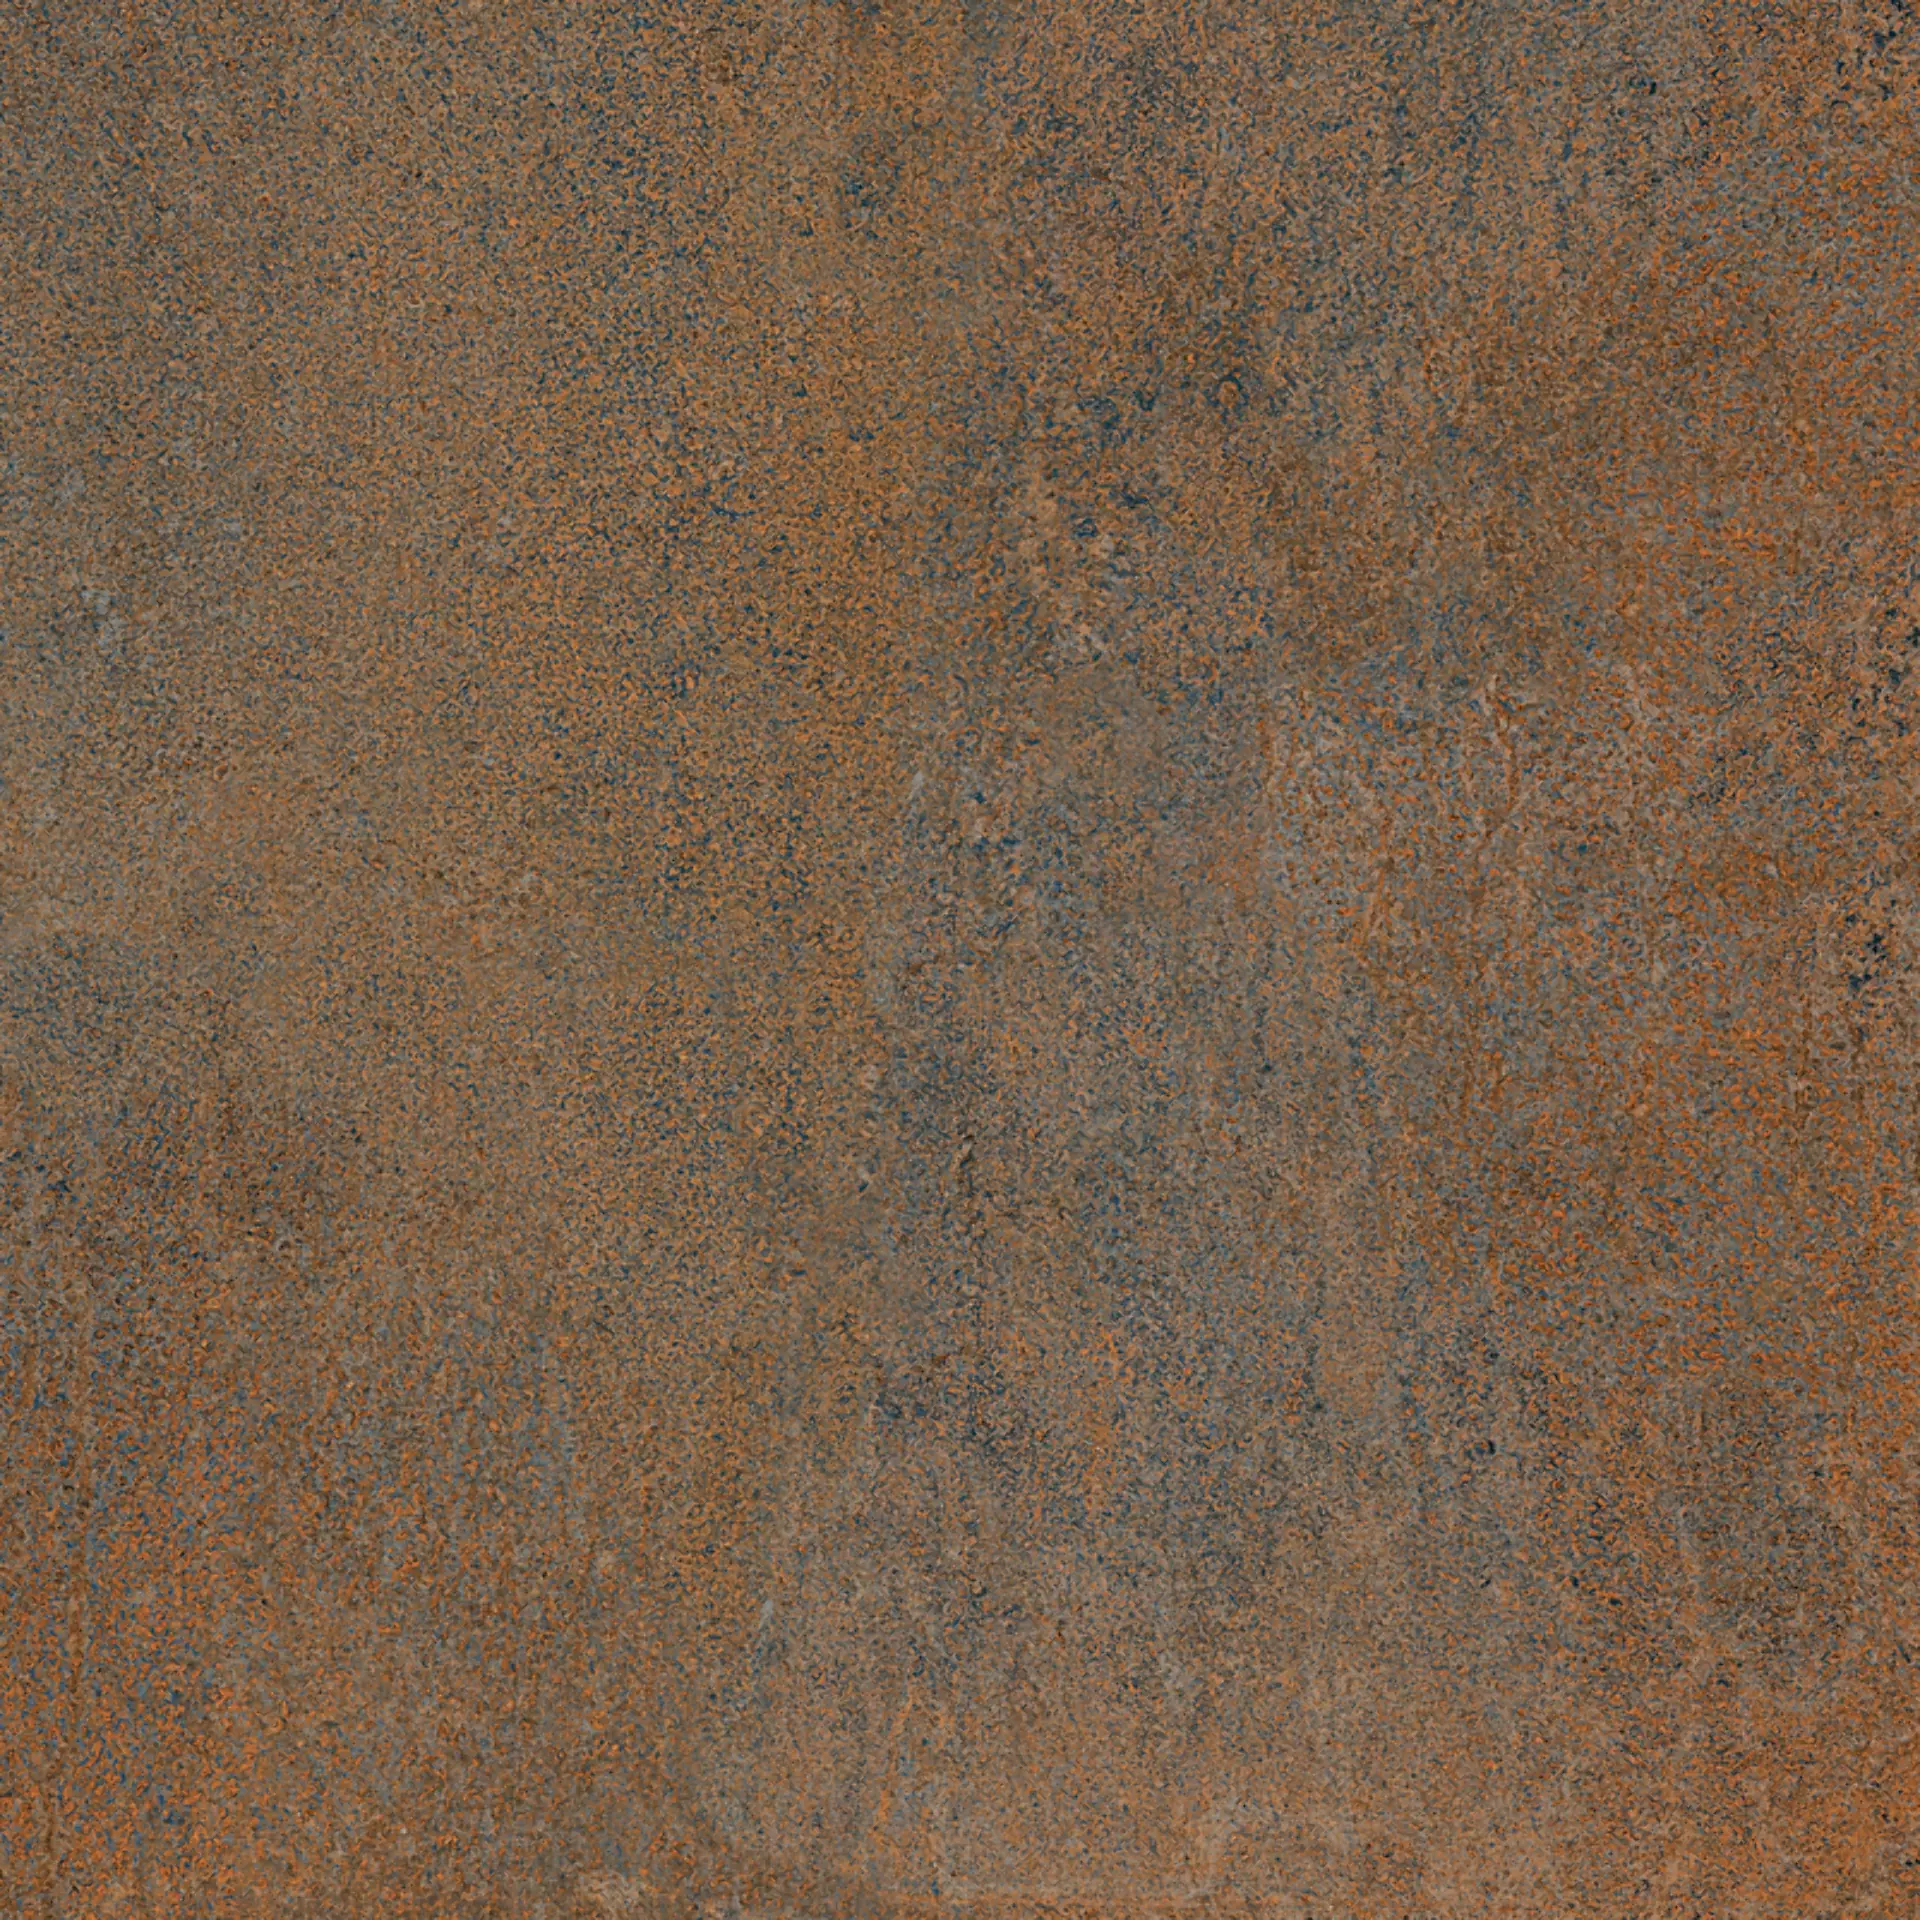 Sant Agostino Oxidart Copper Natural CSAOXCOP60 60x60cm rectified 10mm